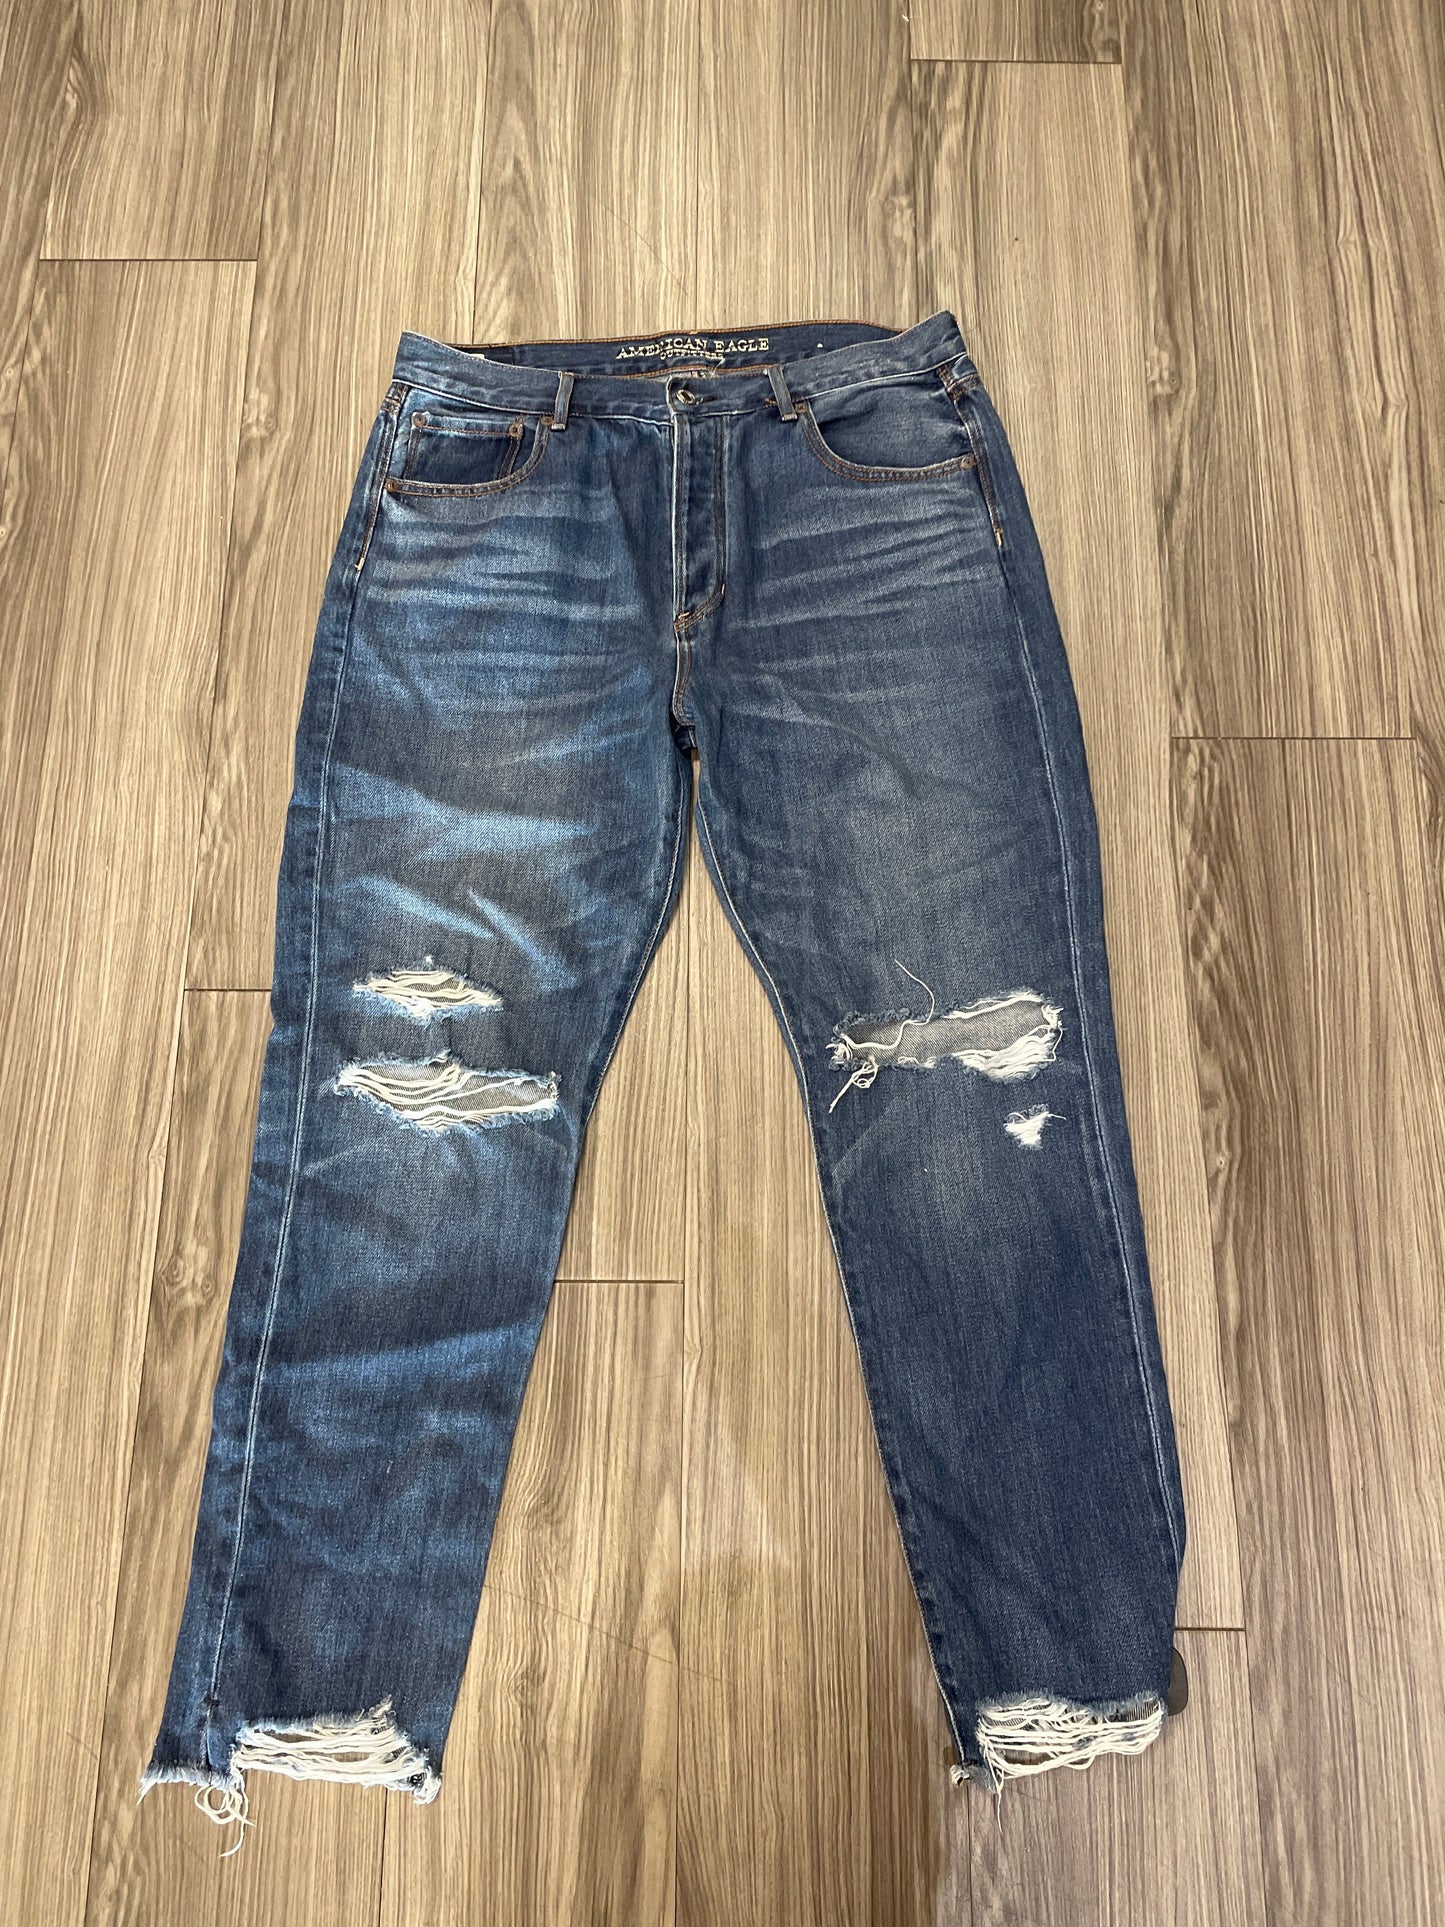 Blue Jeans Straight American Eagle, Size 12